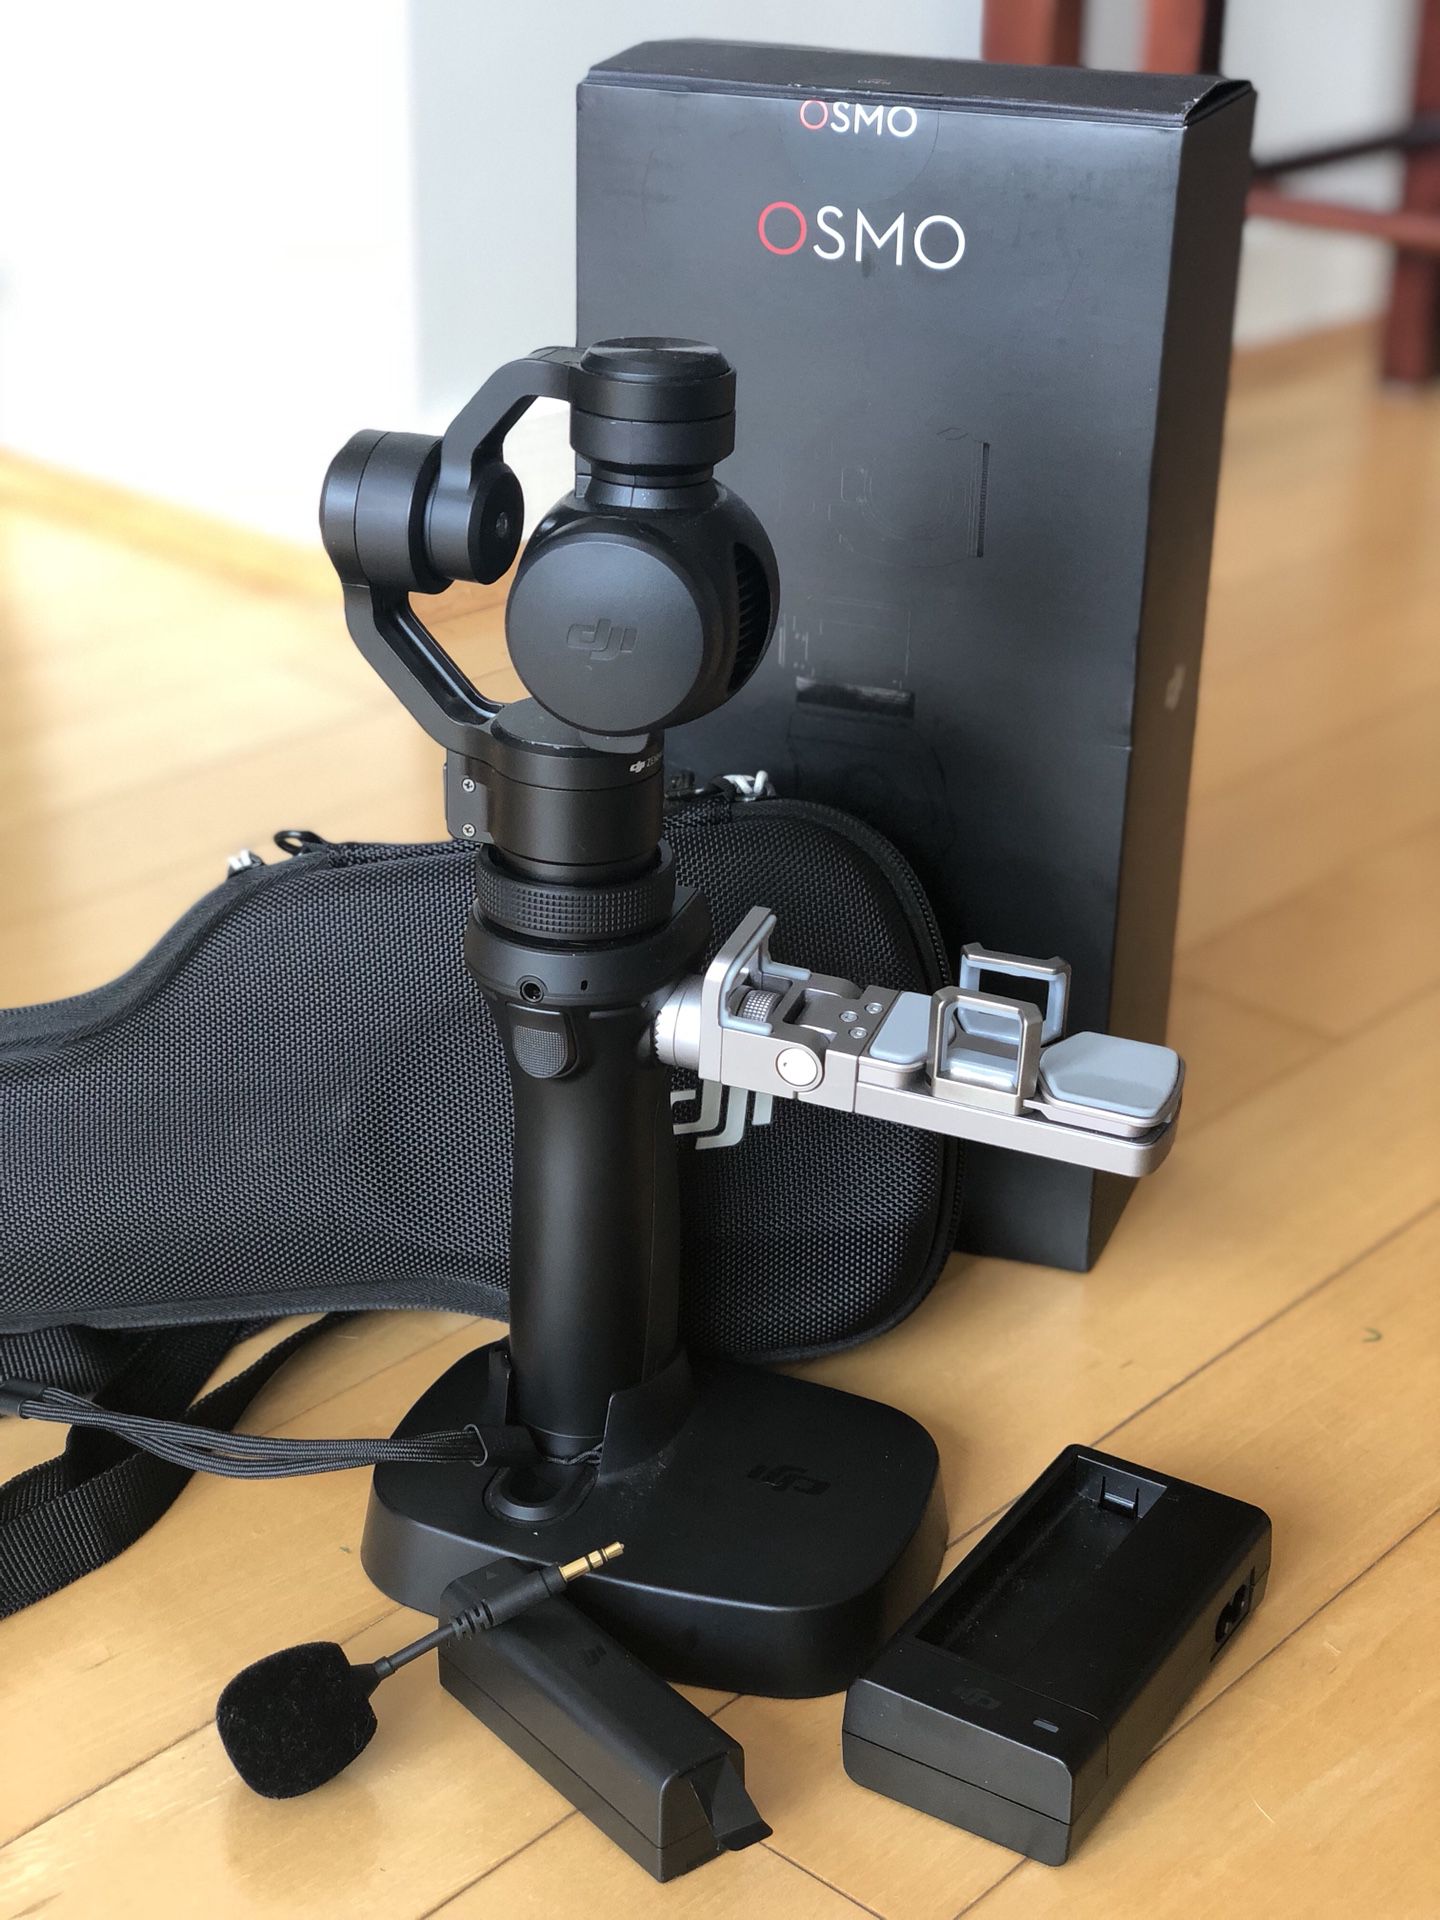 DJI Osmo 4K Gimbal Stabilizer Video Camera with Accessories (better than GoPro)